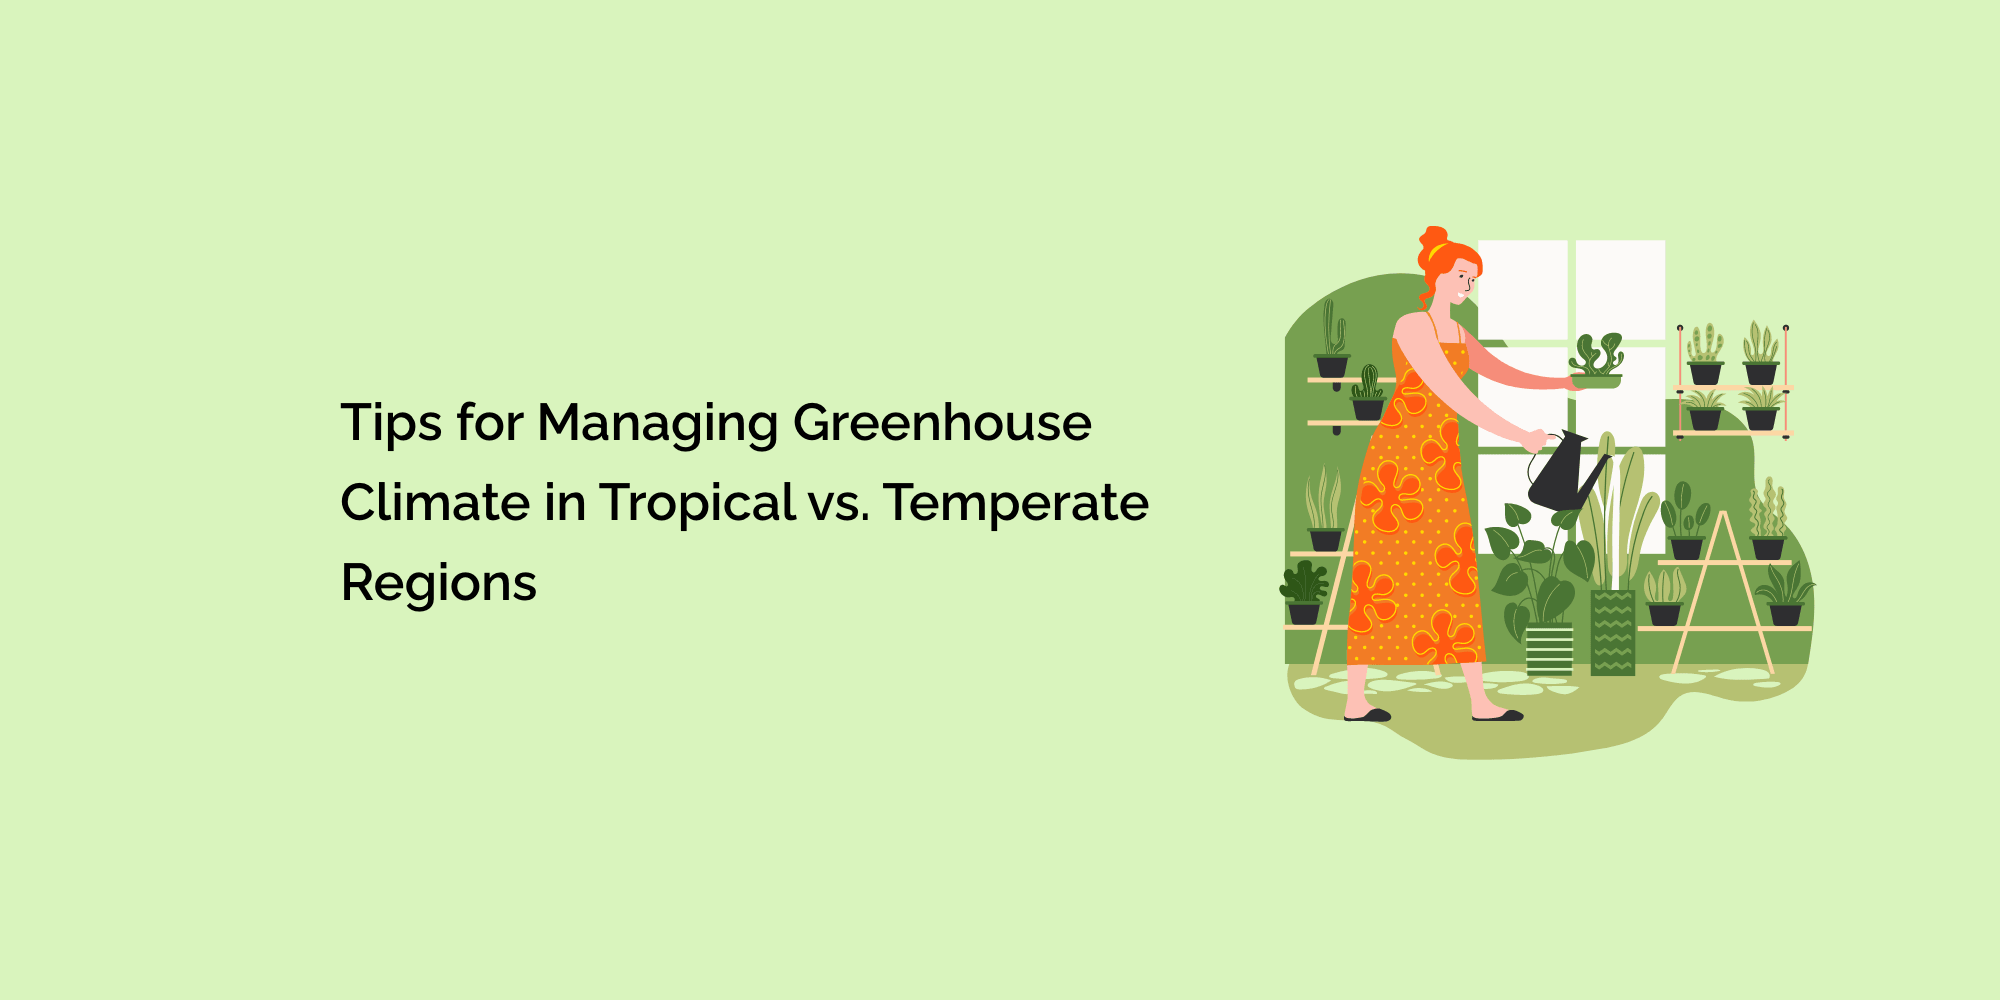 Tips for Managing Greenhouse Climate in Tropical vs. Temperate Regions